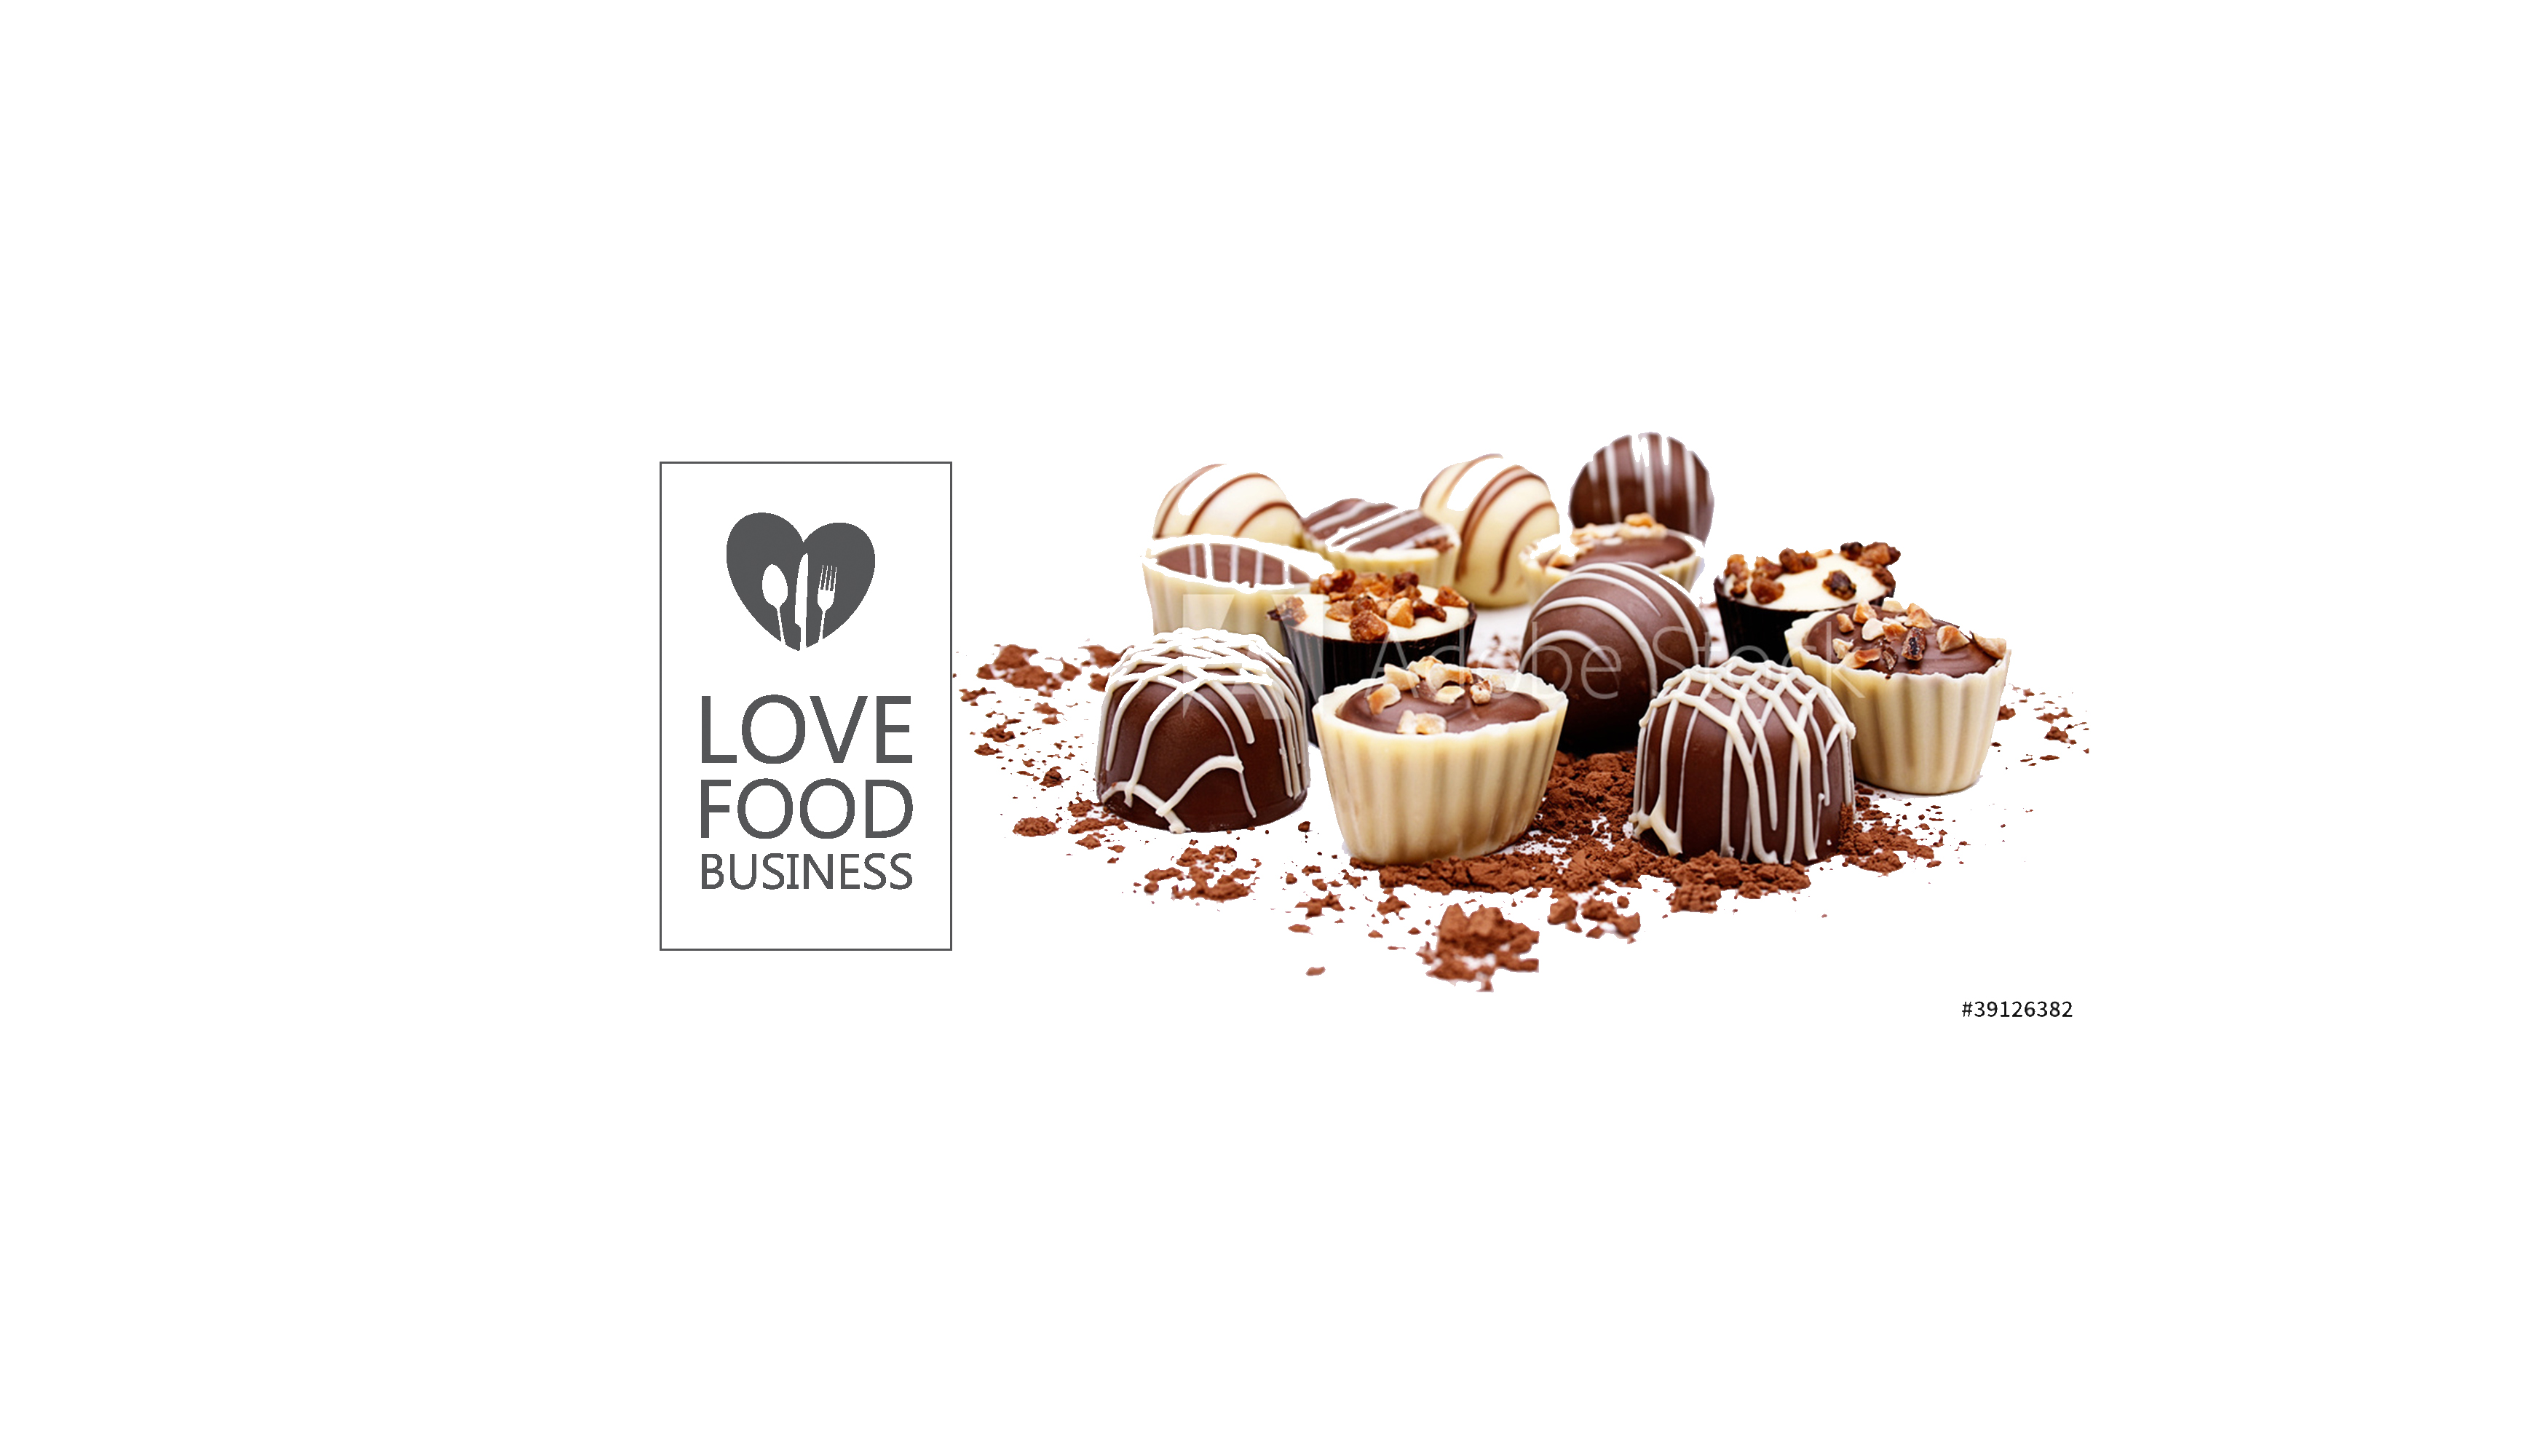 The Business of Food - Love of Food